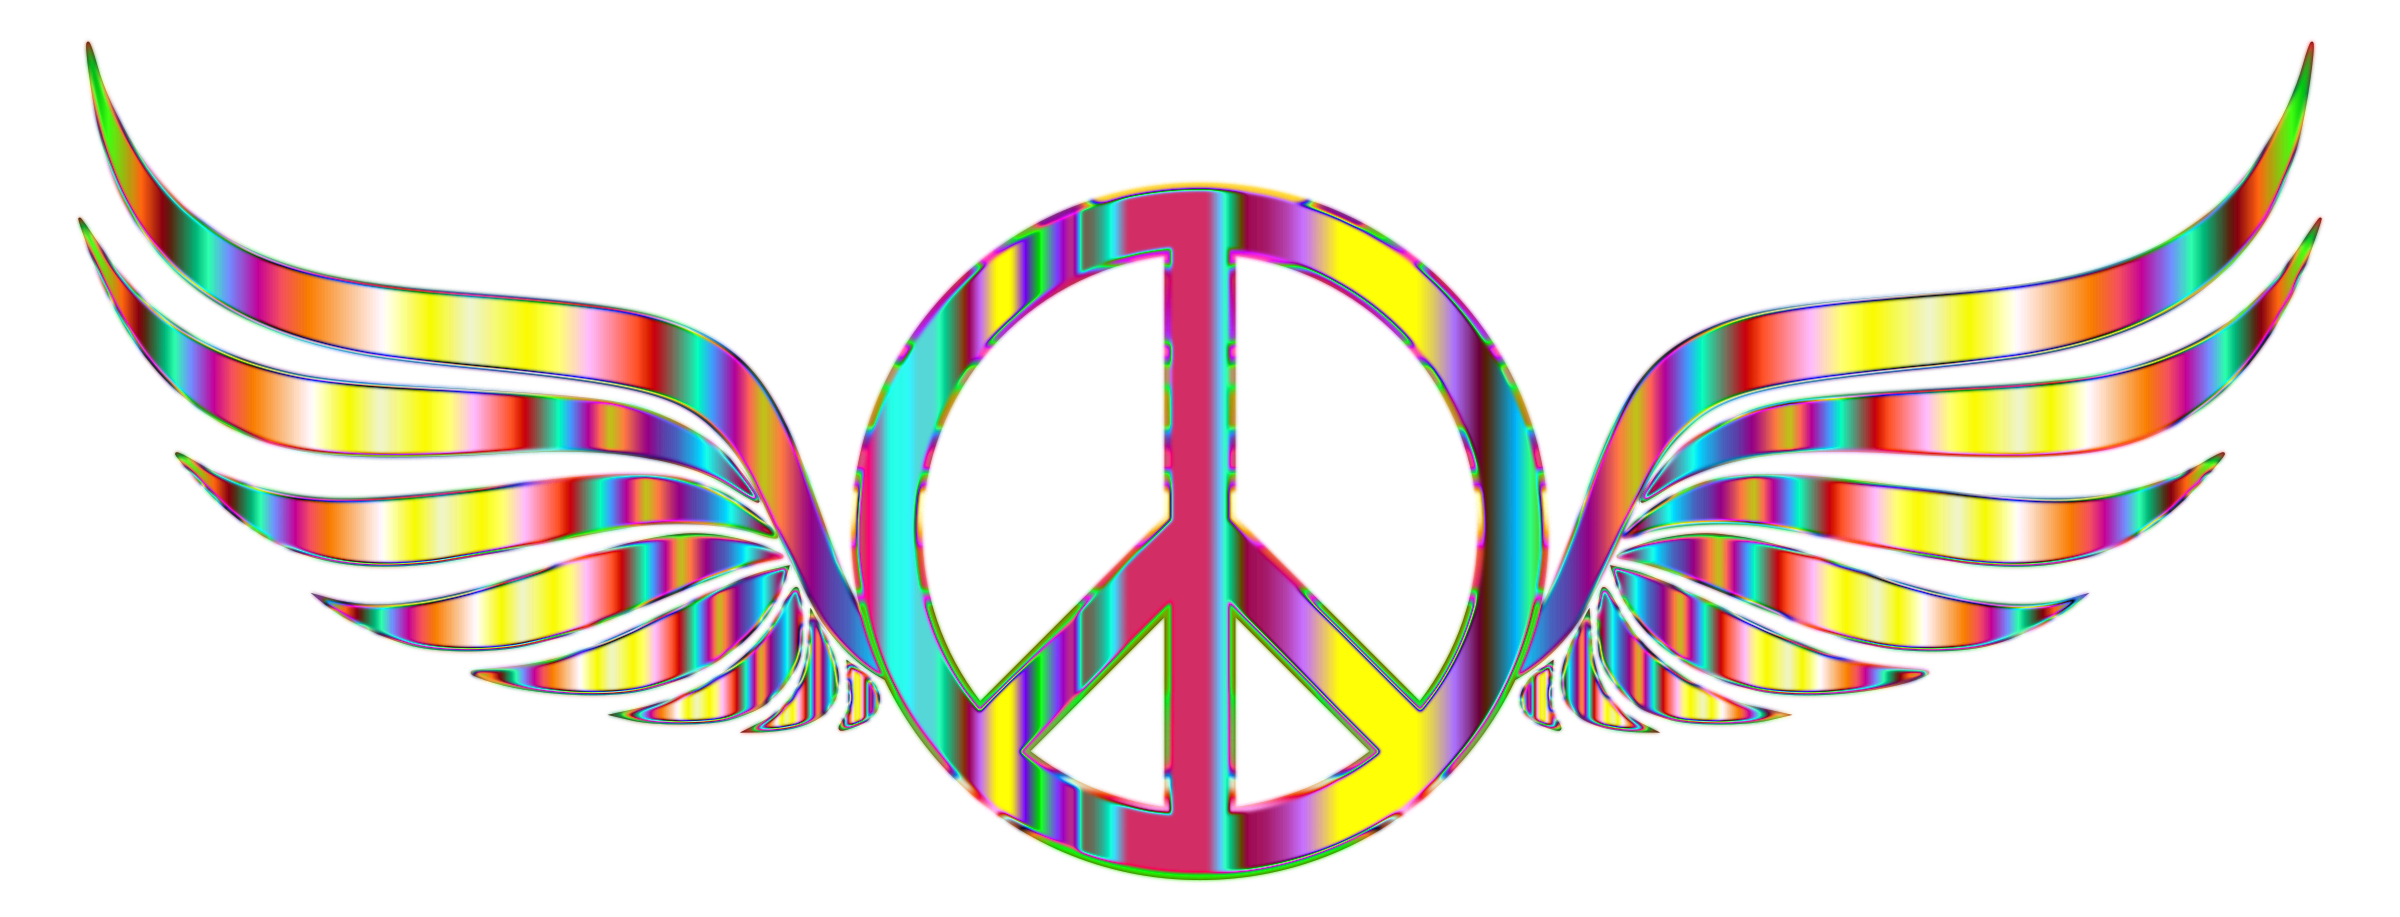 Trippy Peaceful Transparent Png Clipart Ywd